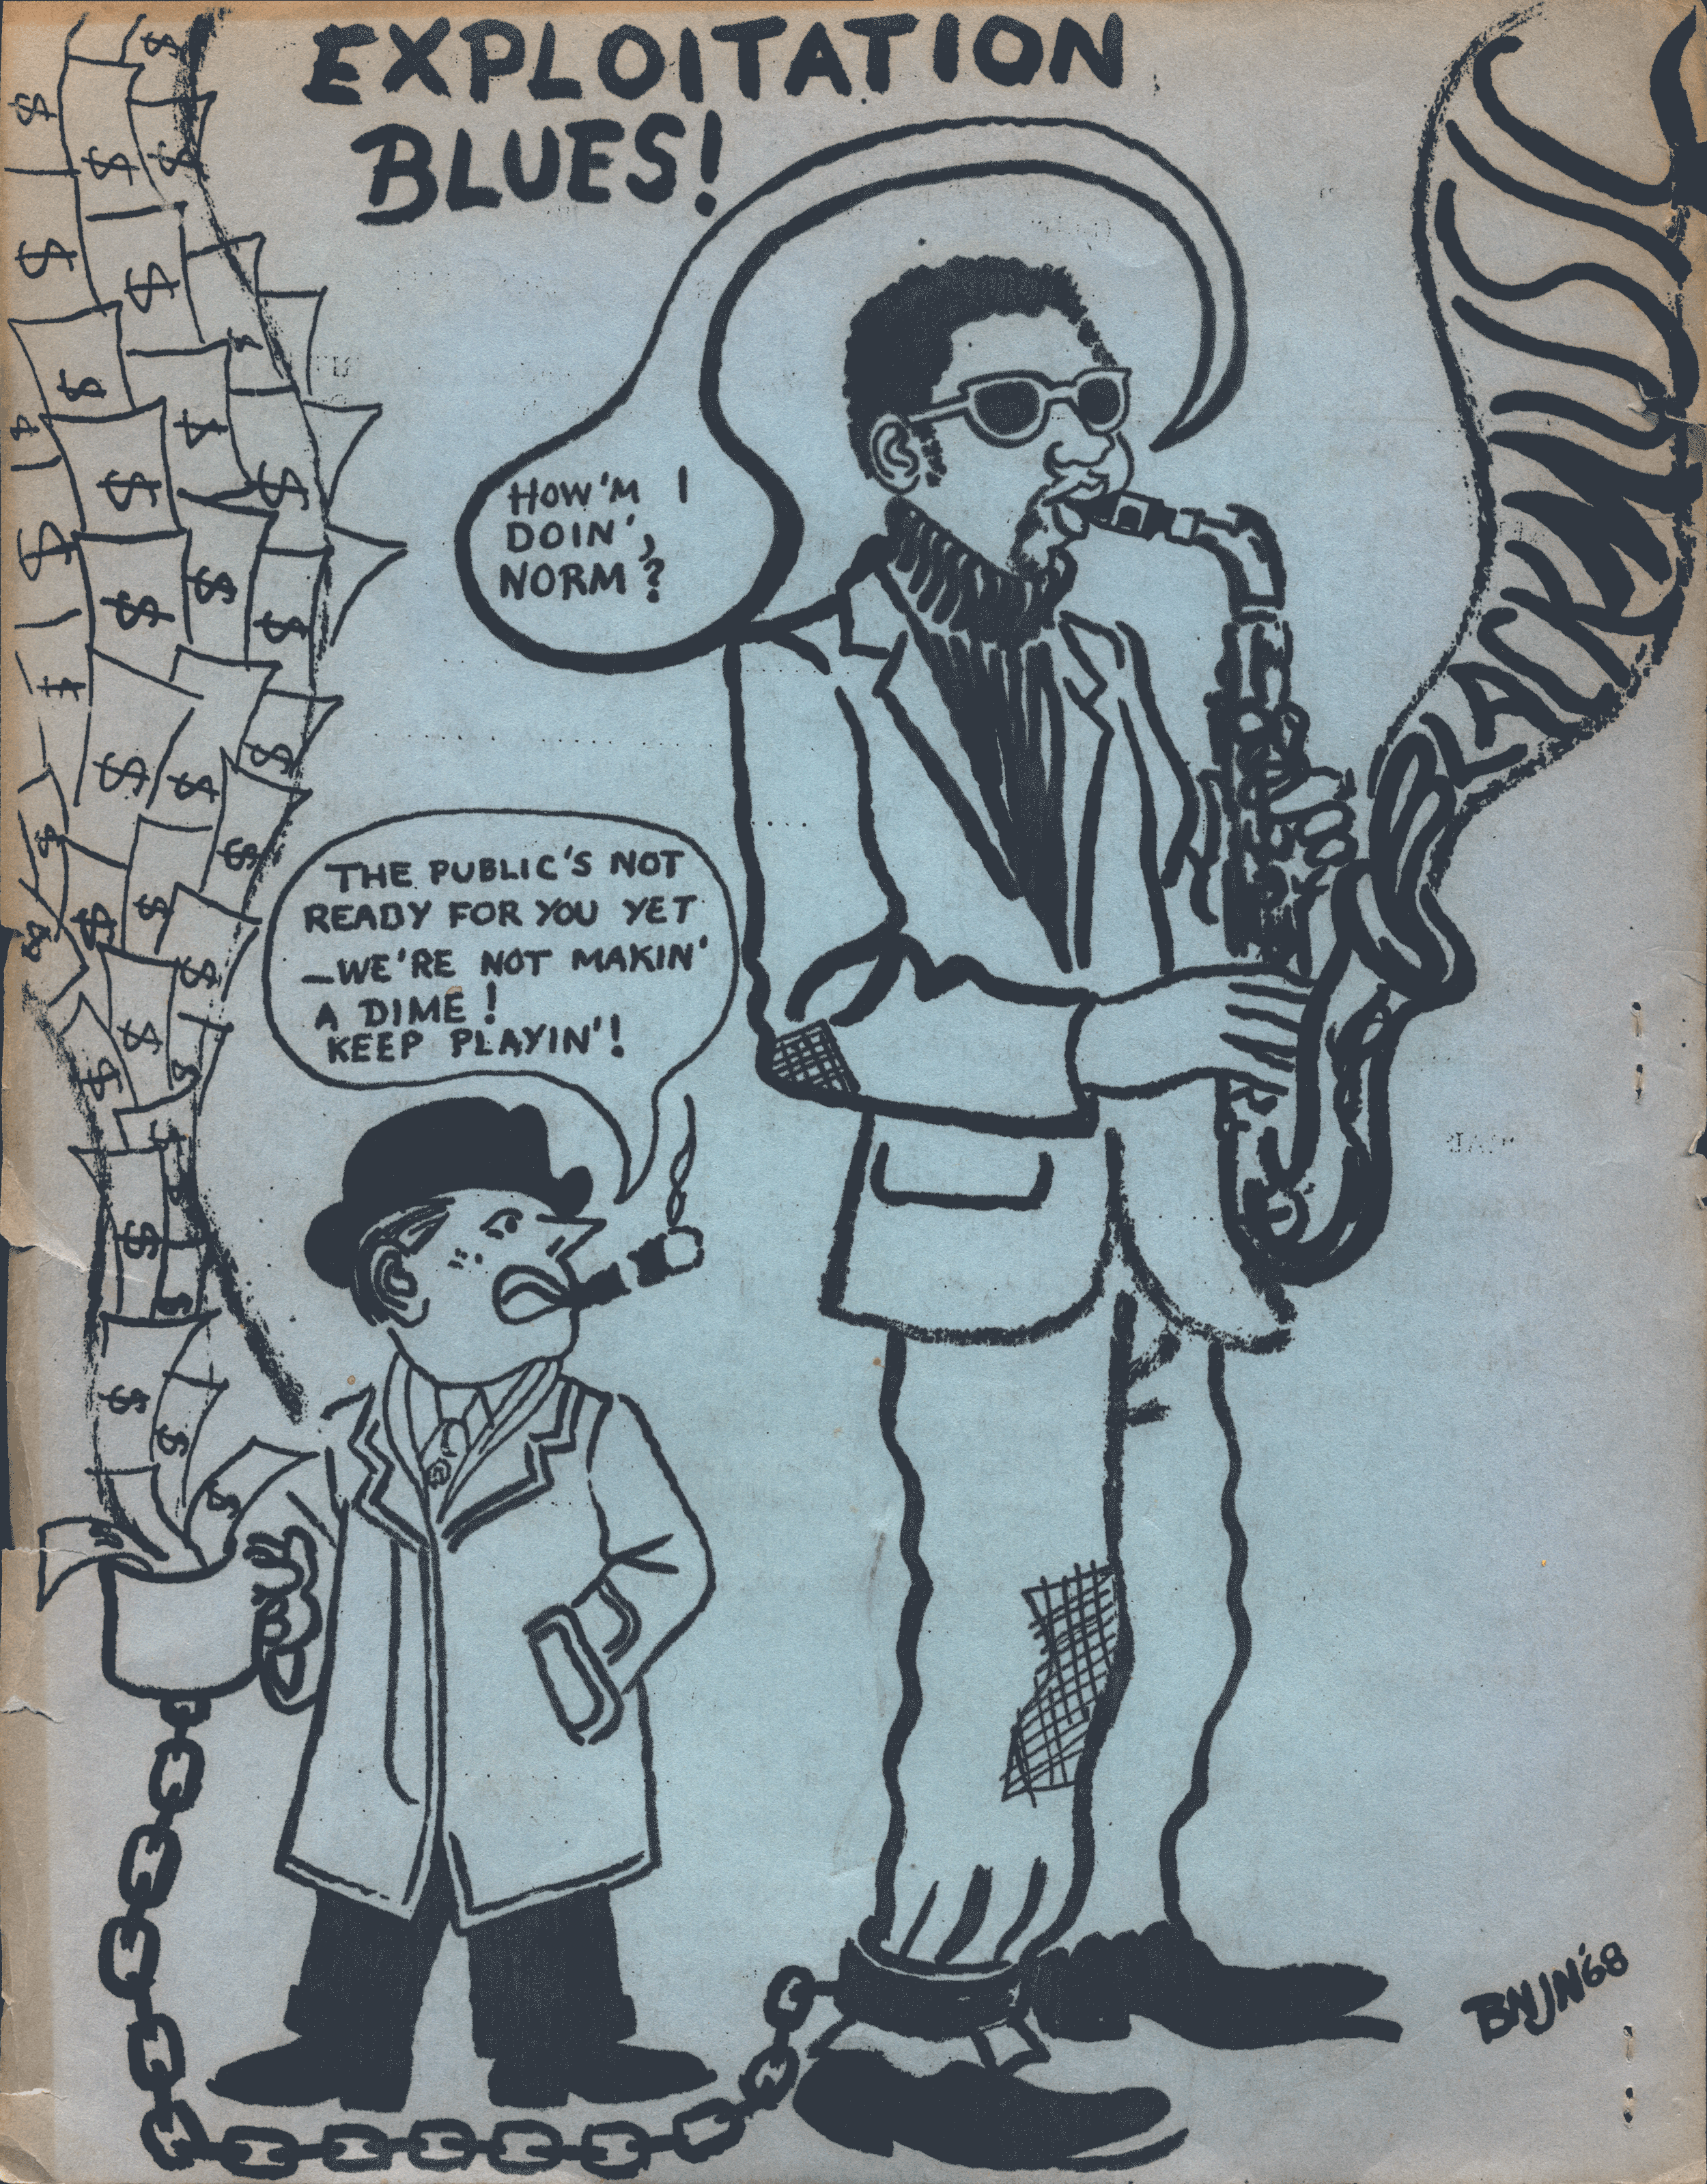 Ben Caldwell's Exploitation blues comic, featuring a black saxophone player askign "How', I Doin' Norm?" and white representative of the music industry champing a cigar and responding "The Public's Not Ready for you yet—we're not makin' a dime! Keep playin!" His cup collecting tips is overflowing, and the musician is shackled to it